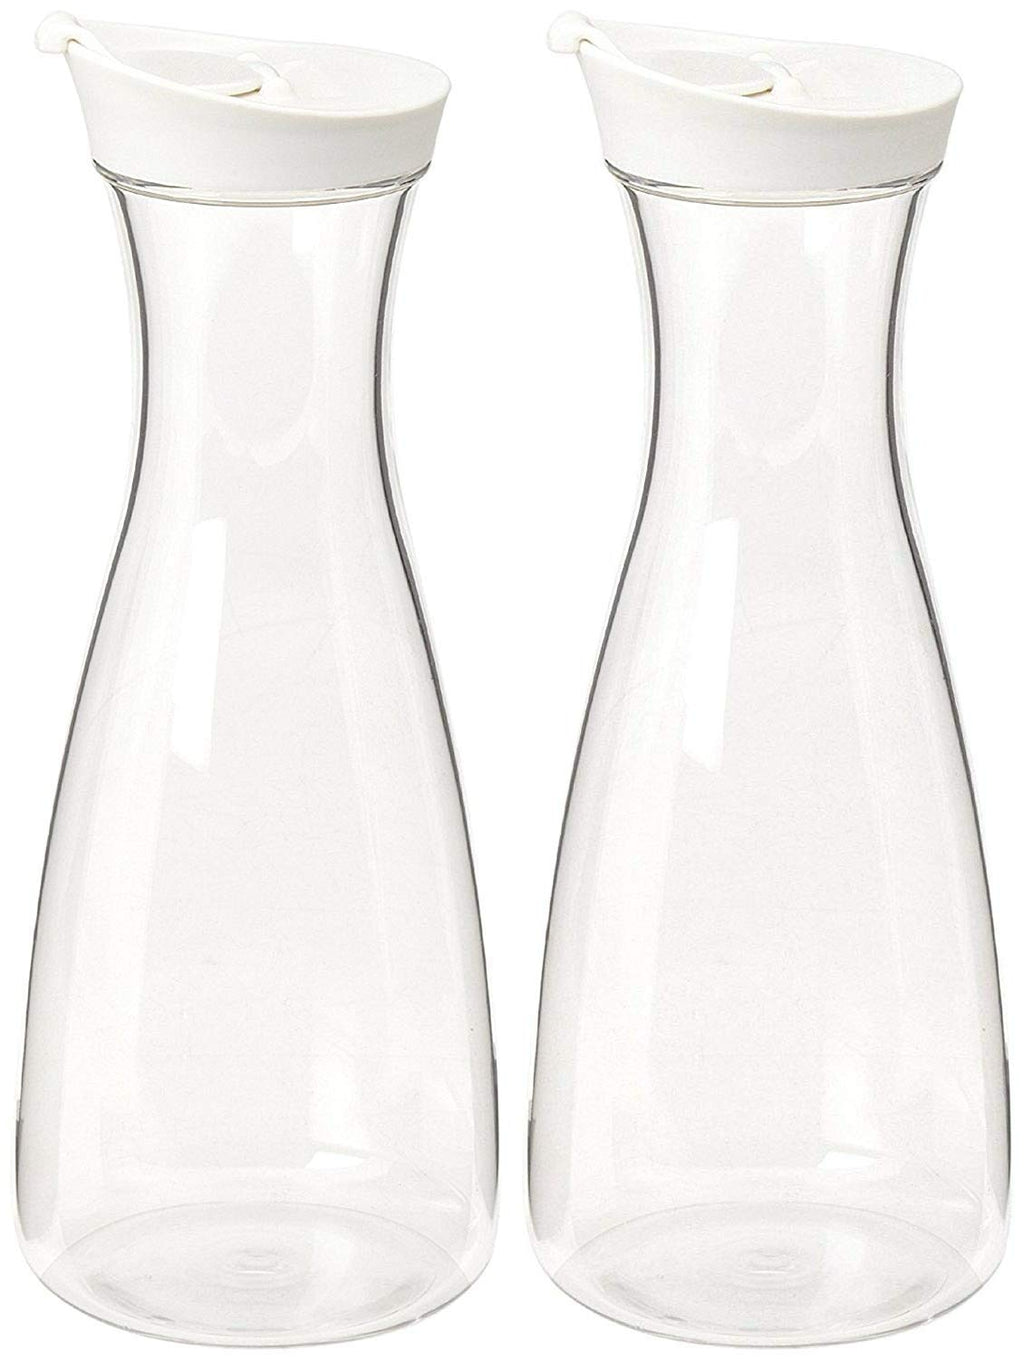 [Australia - AusPower] - 2 Pack - Large White (clear) Plastic Carafe Pitcher -Acrylic -BPA Free -57 oz.(1.7 LT.) - Premium Quality - For Juice - Water - Wine - Iced Tea or Milk- Not Suitable for Hot Drinks - No Stickers! (2) 2 